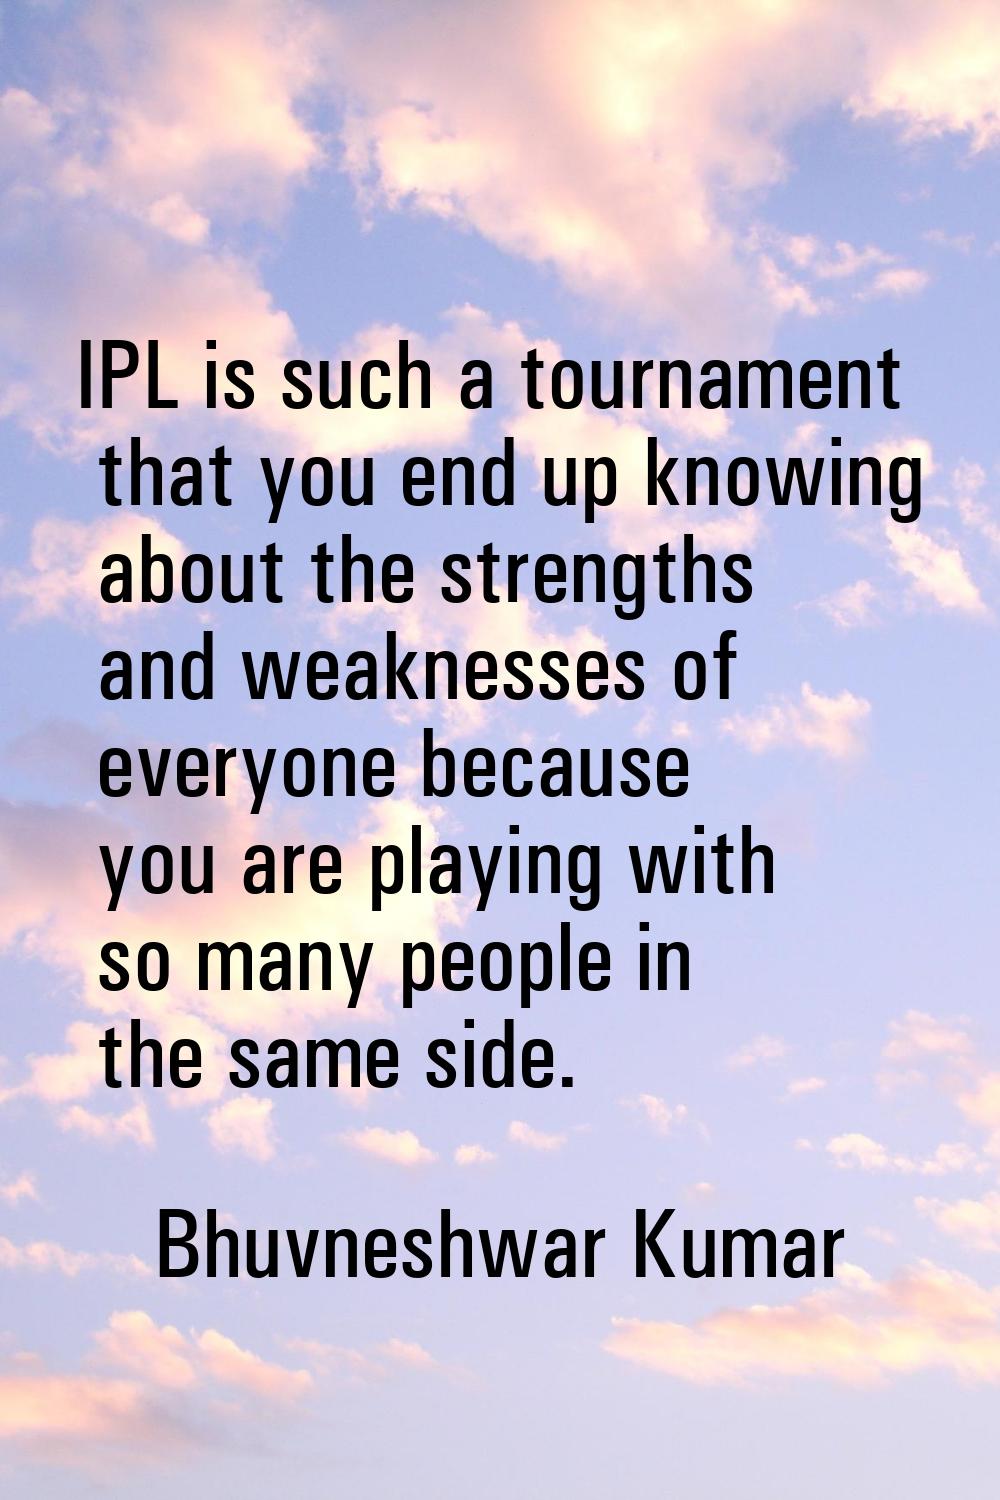 IPL is such a tournament that you end up knowing about the strengths and weaknesses of everyone bec